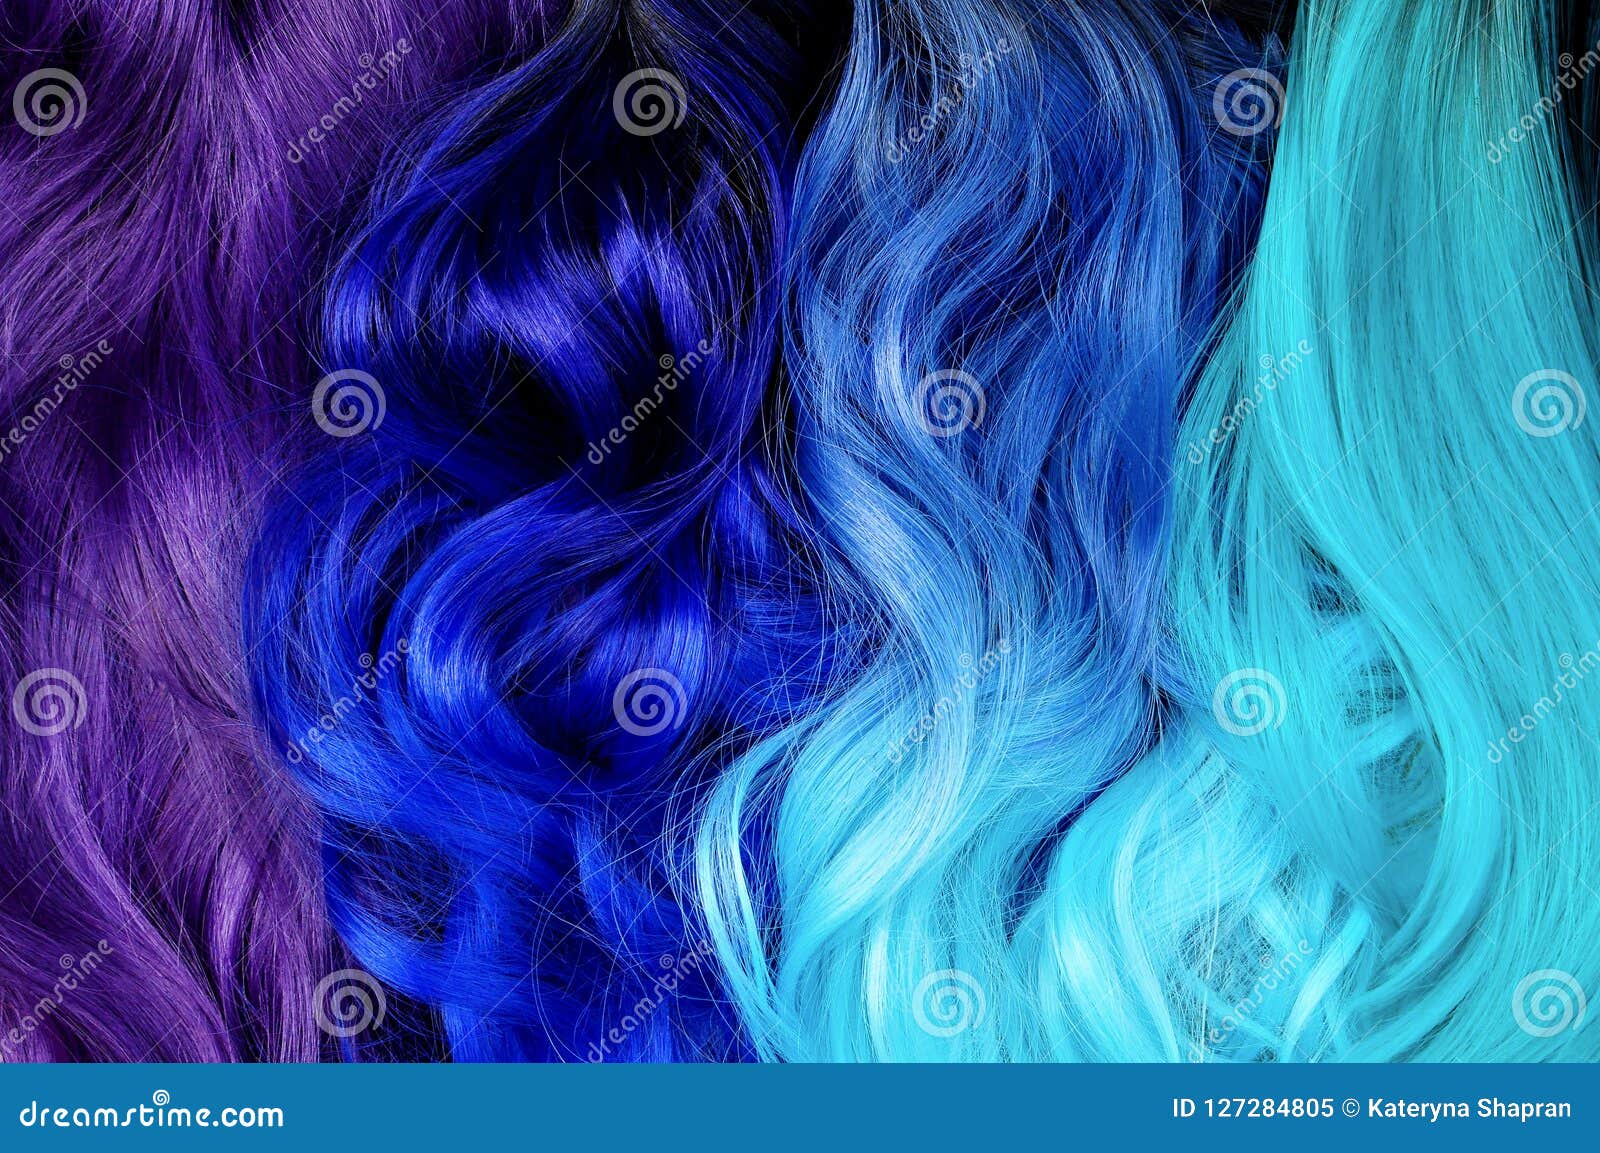 ombre hair blue turquoise